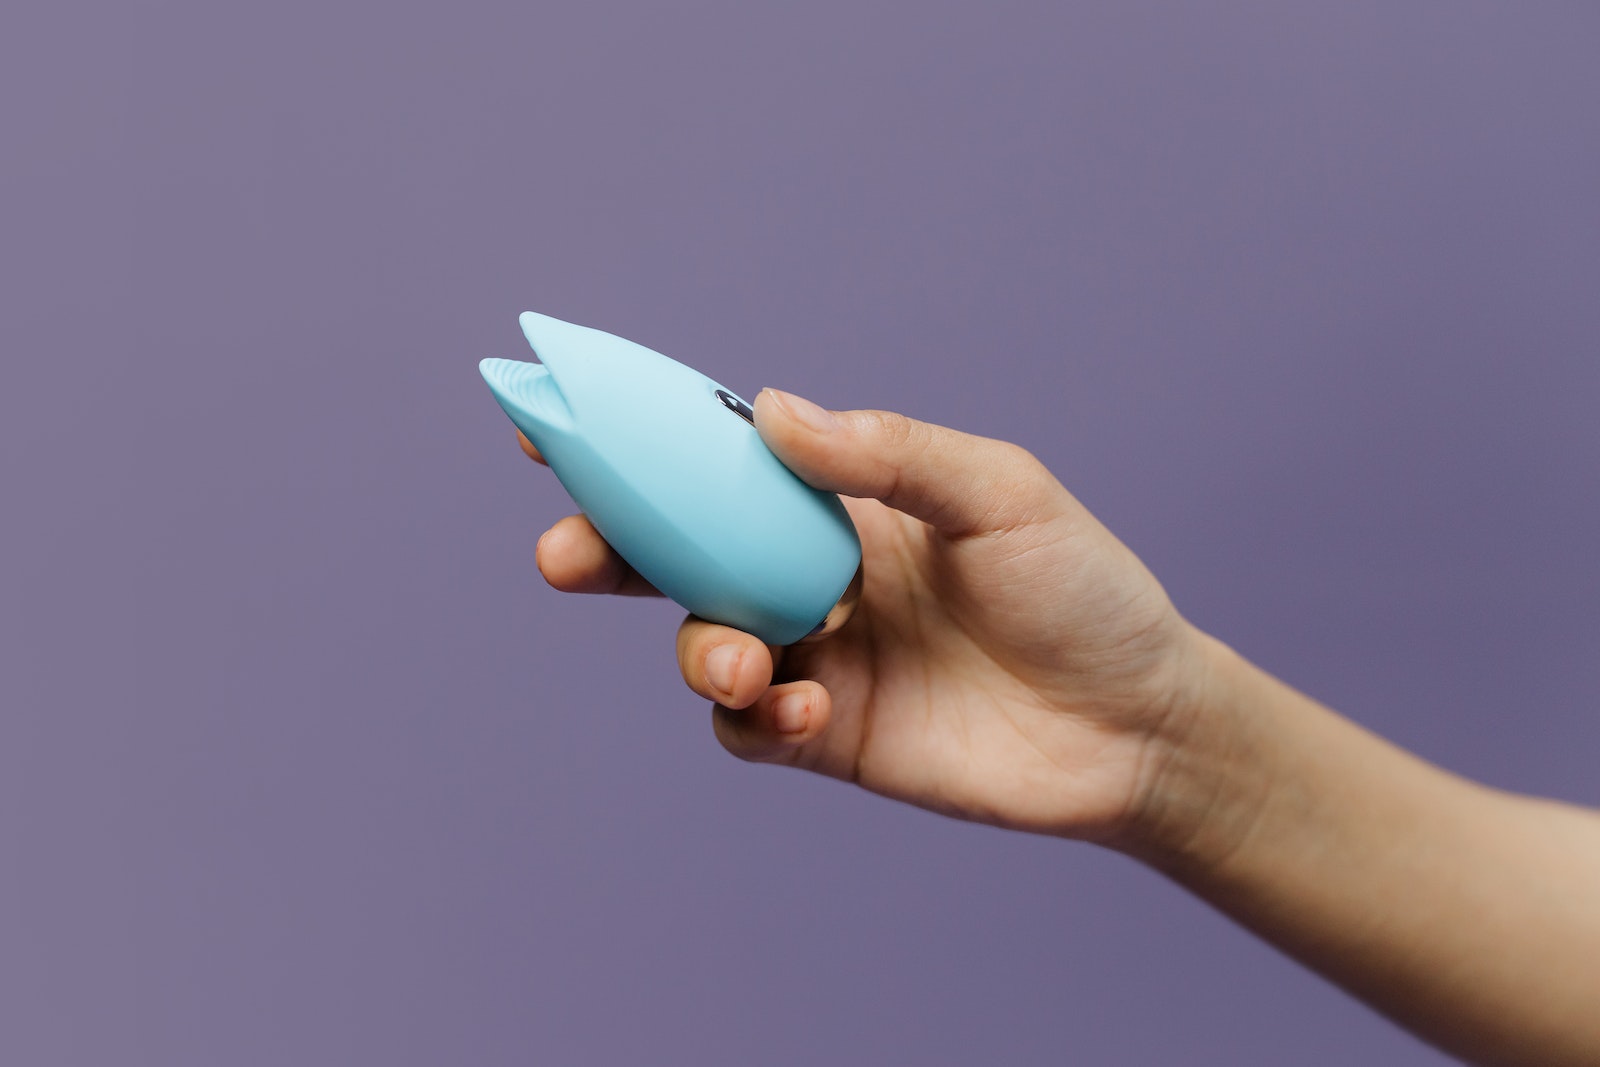 A Person Holding a Blue Sex Toy